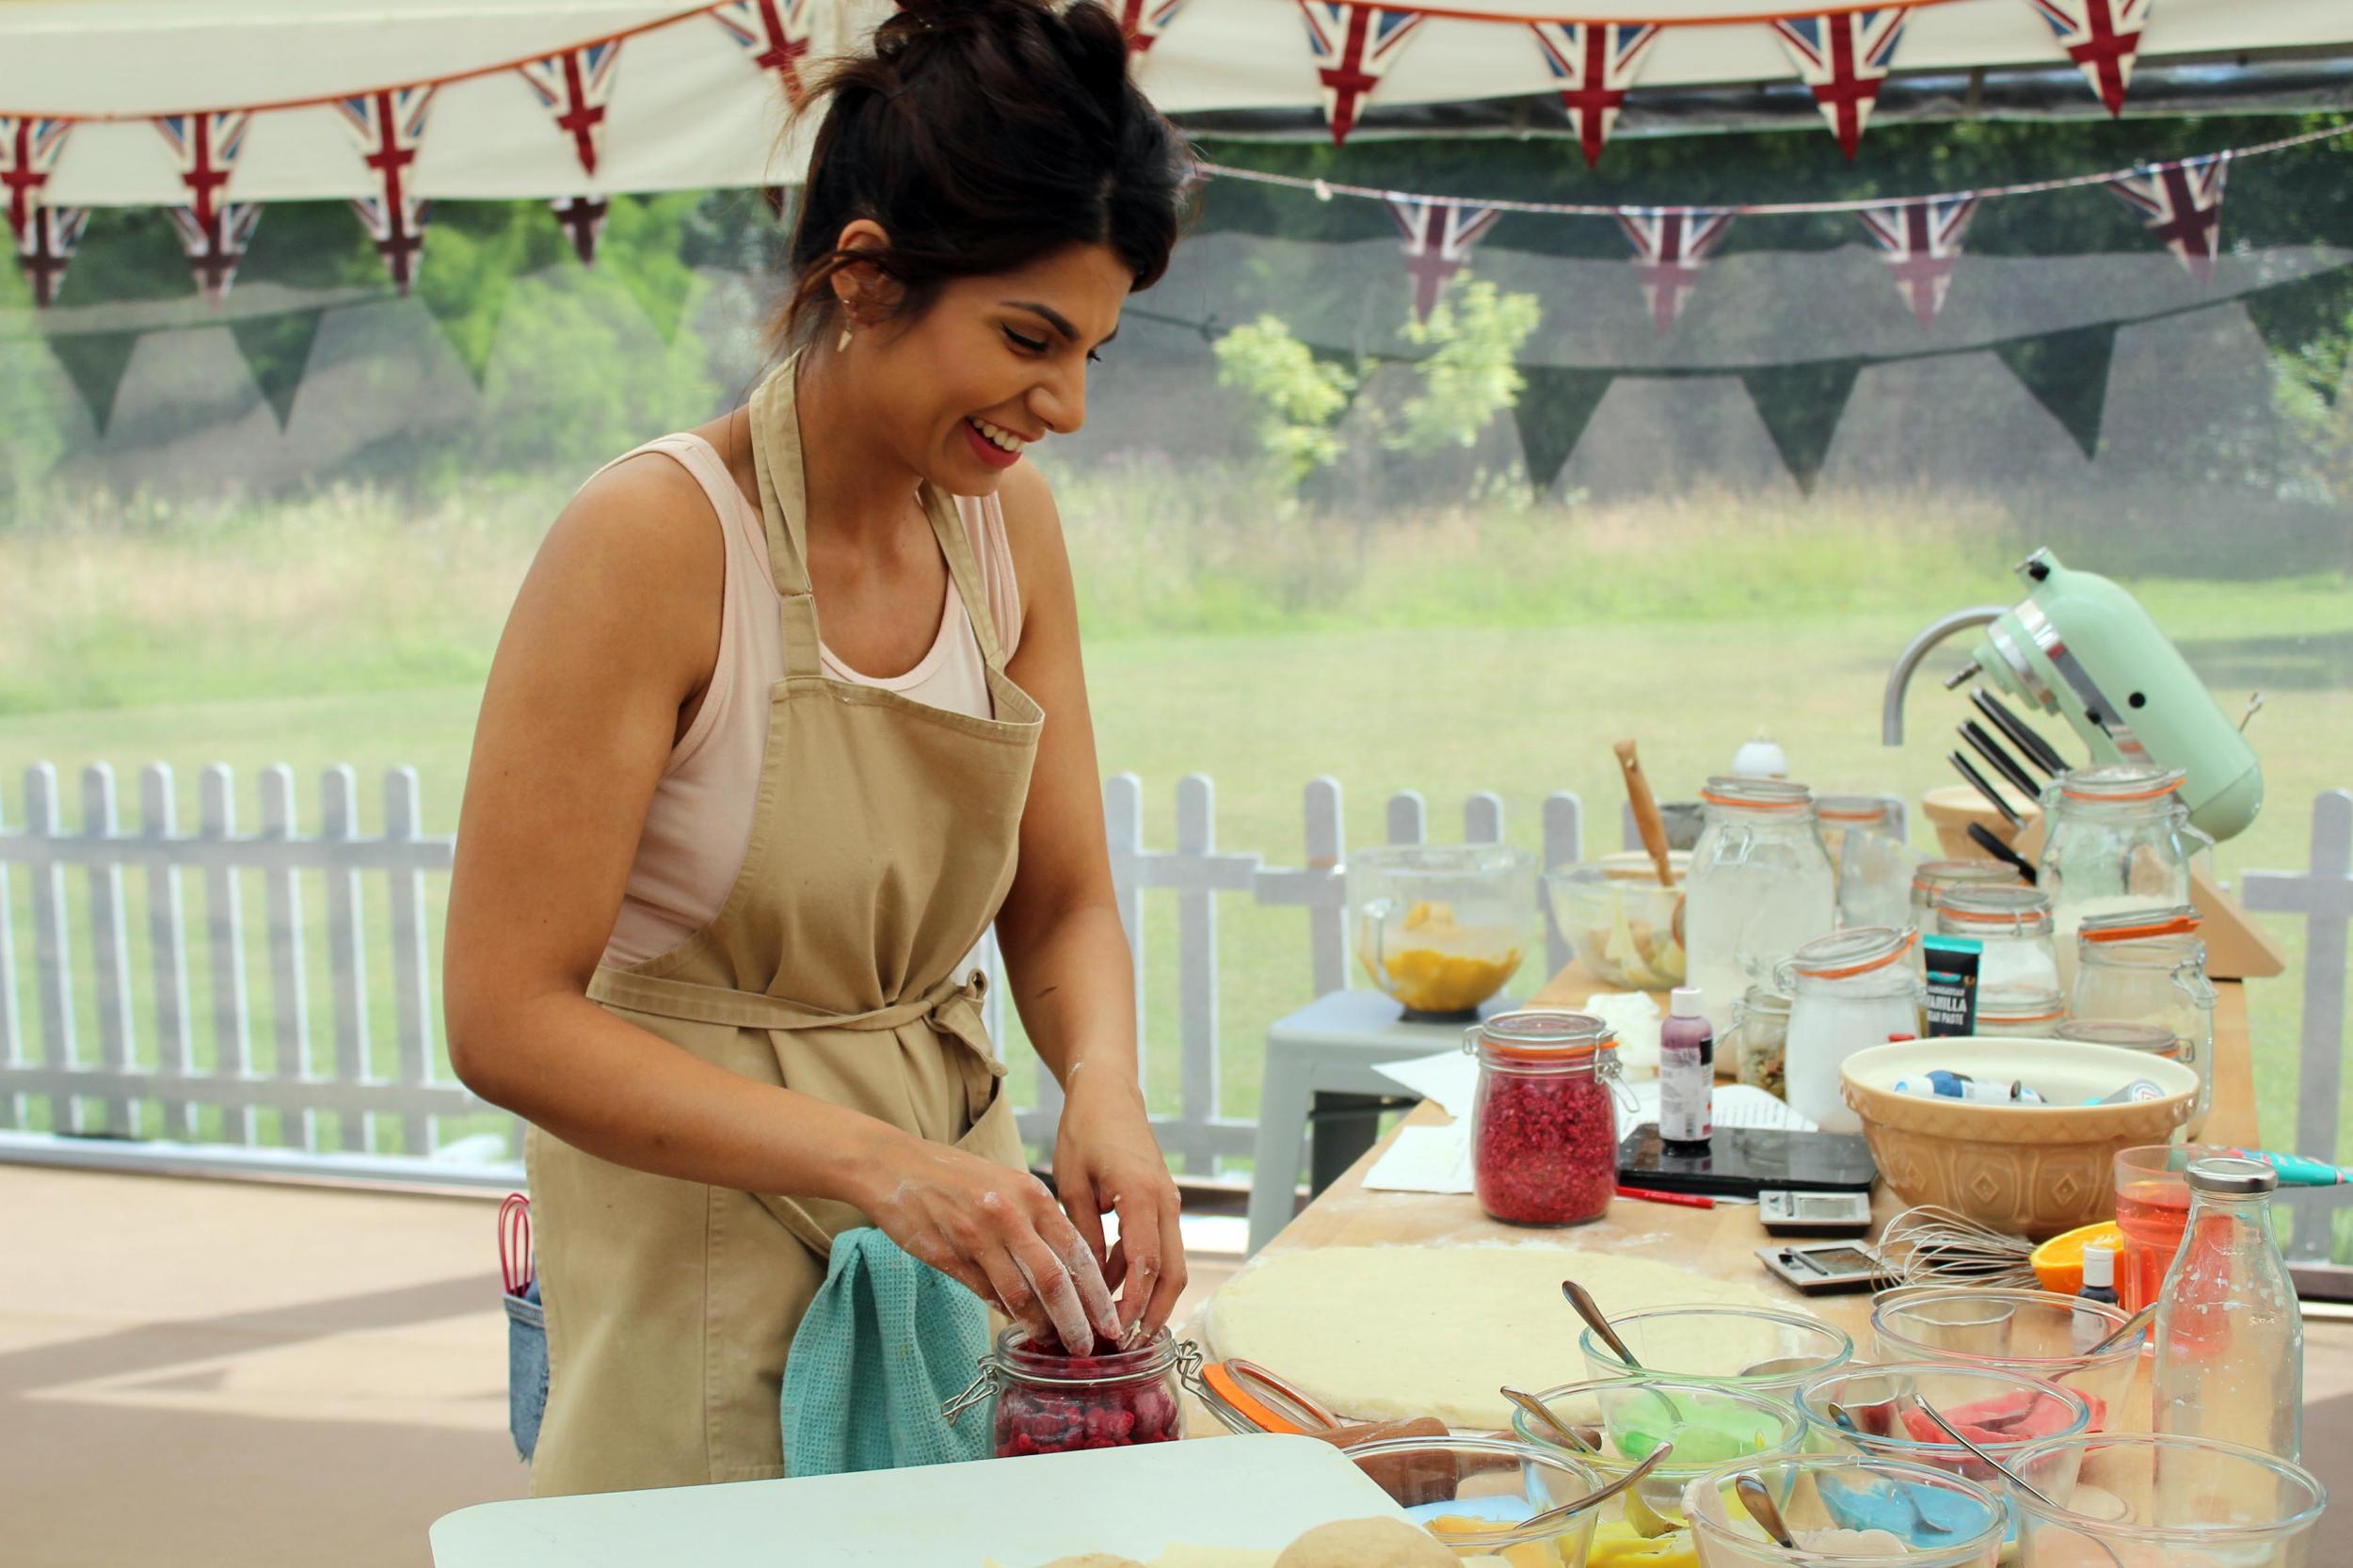 Ruby on ‘Bake Off’